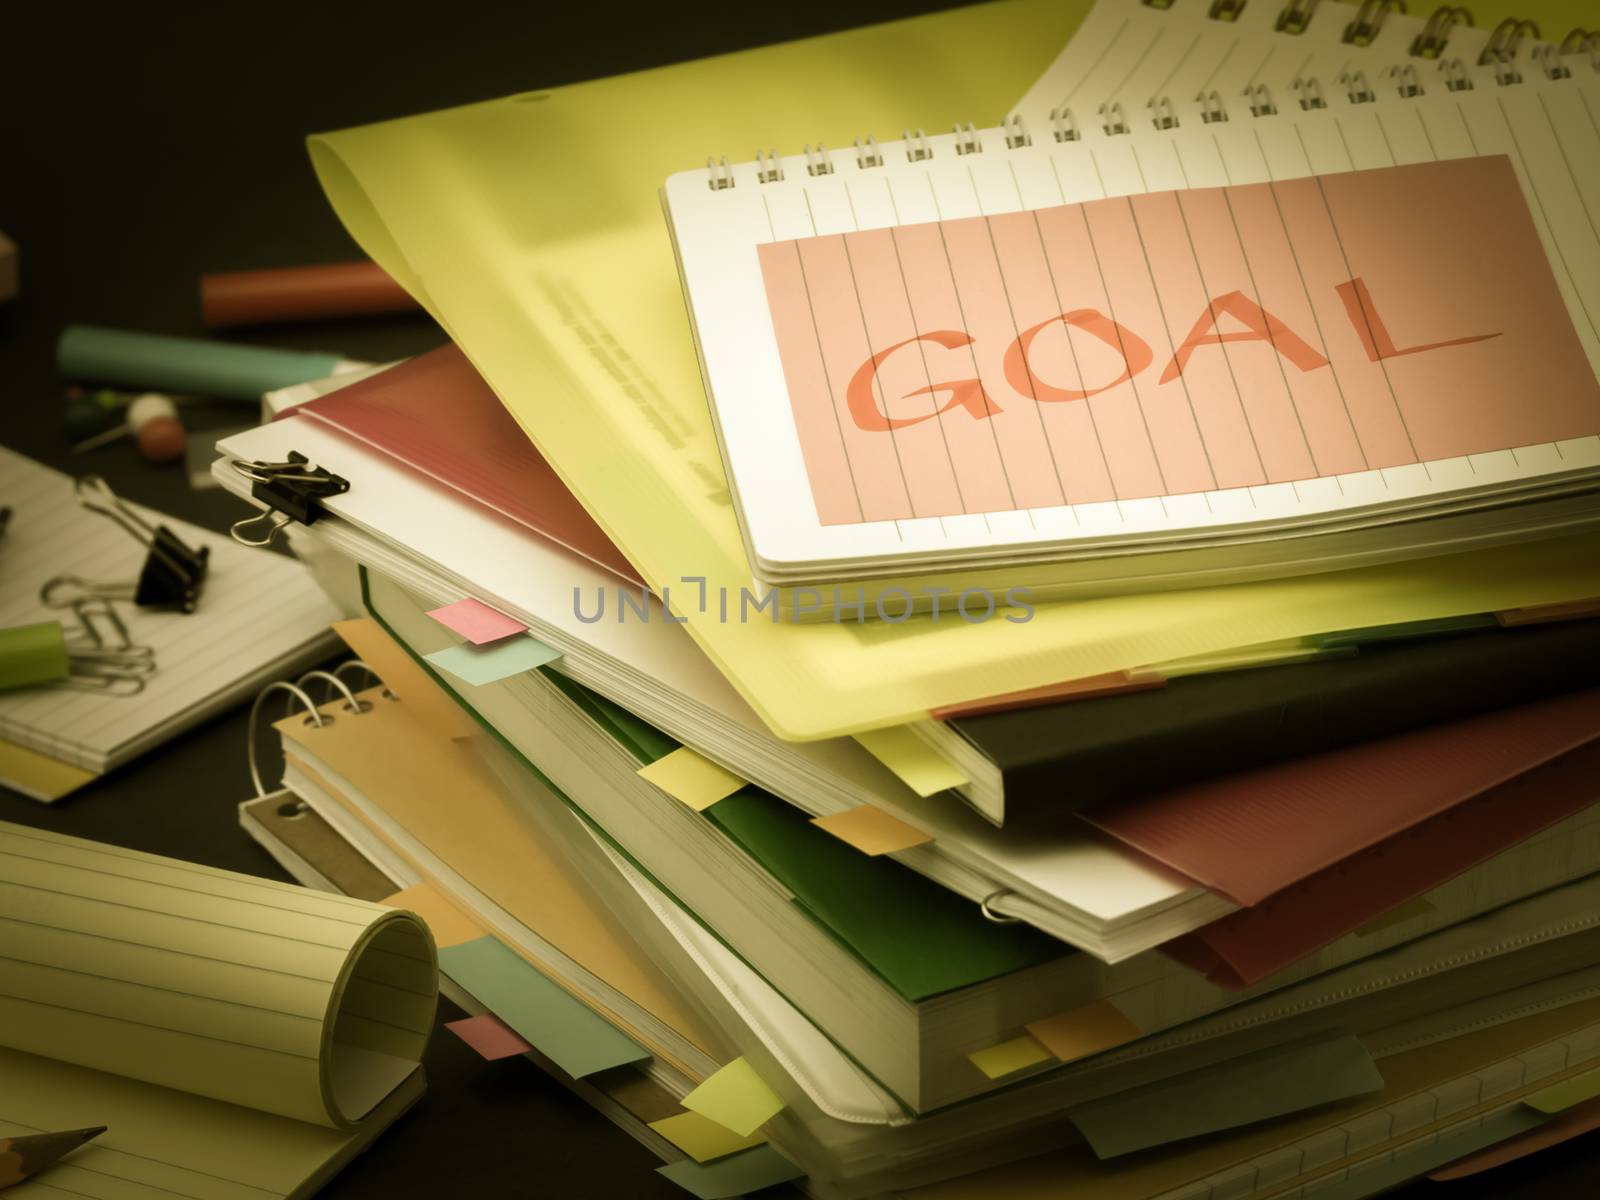 The Pile of Business Documents; Goal